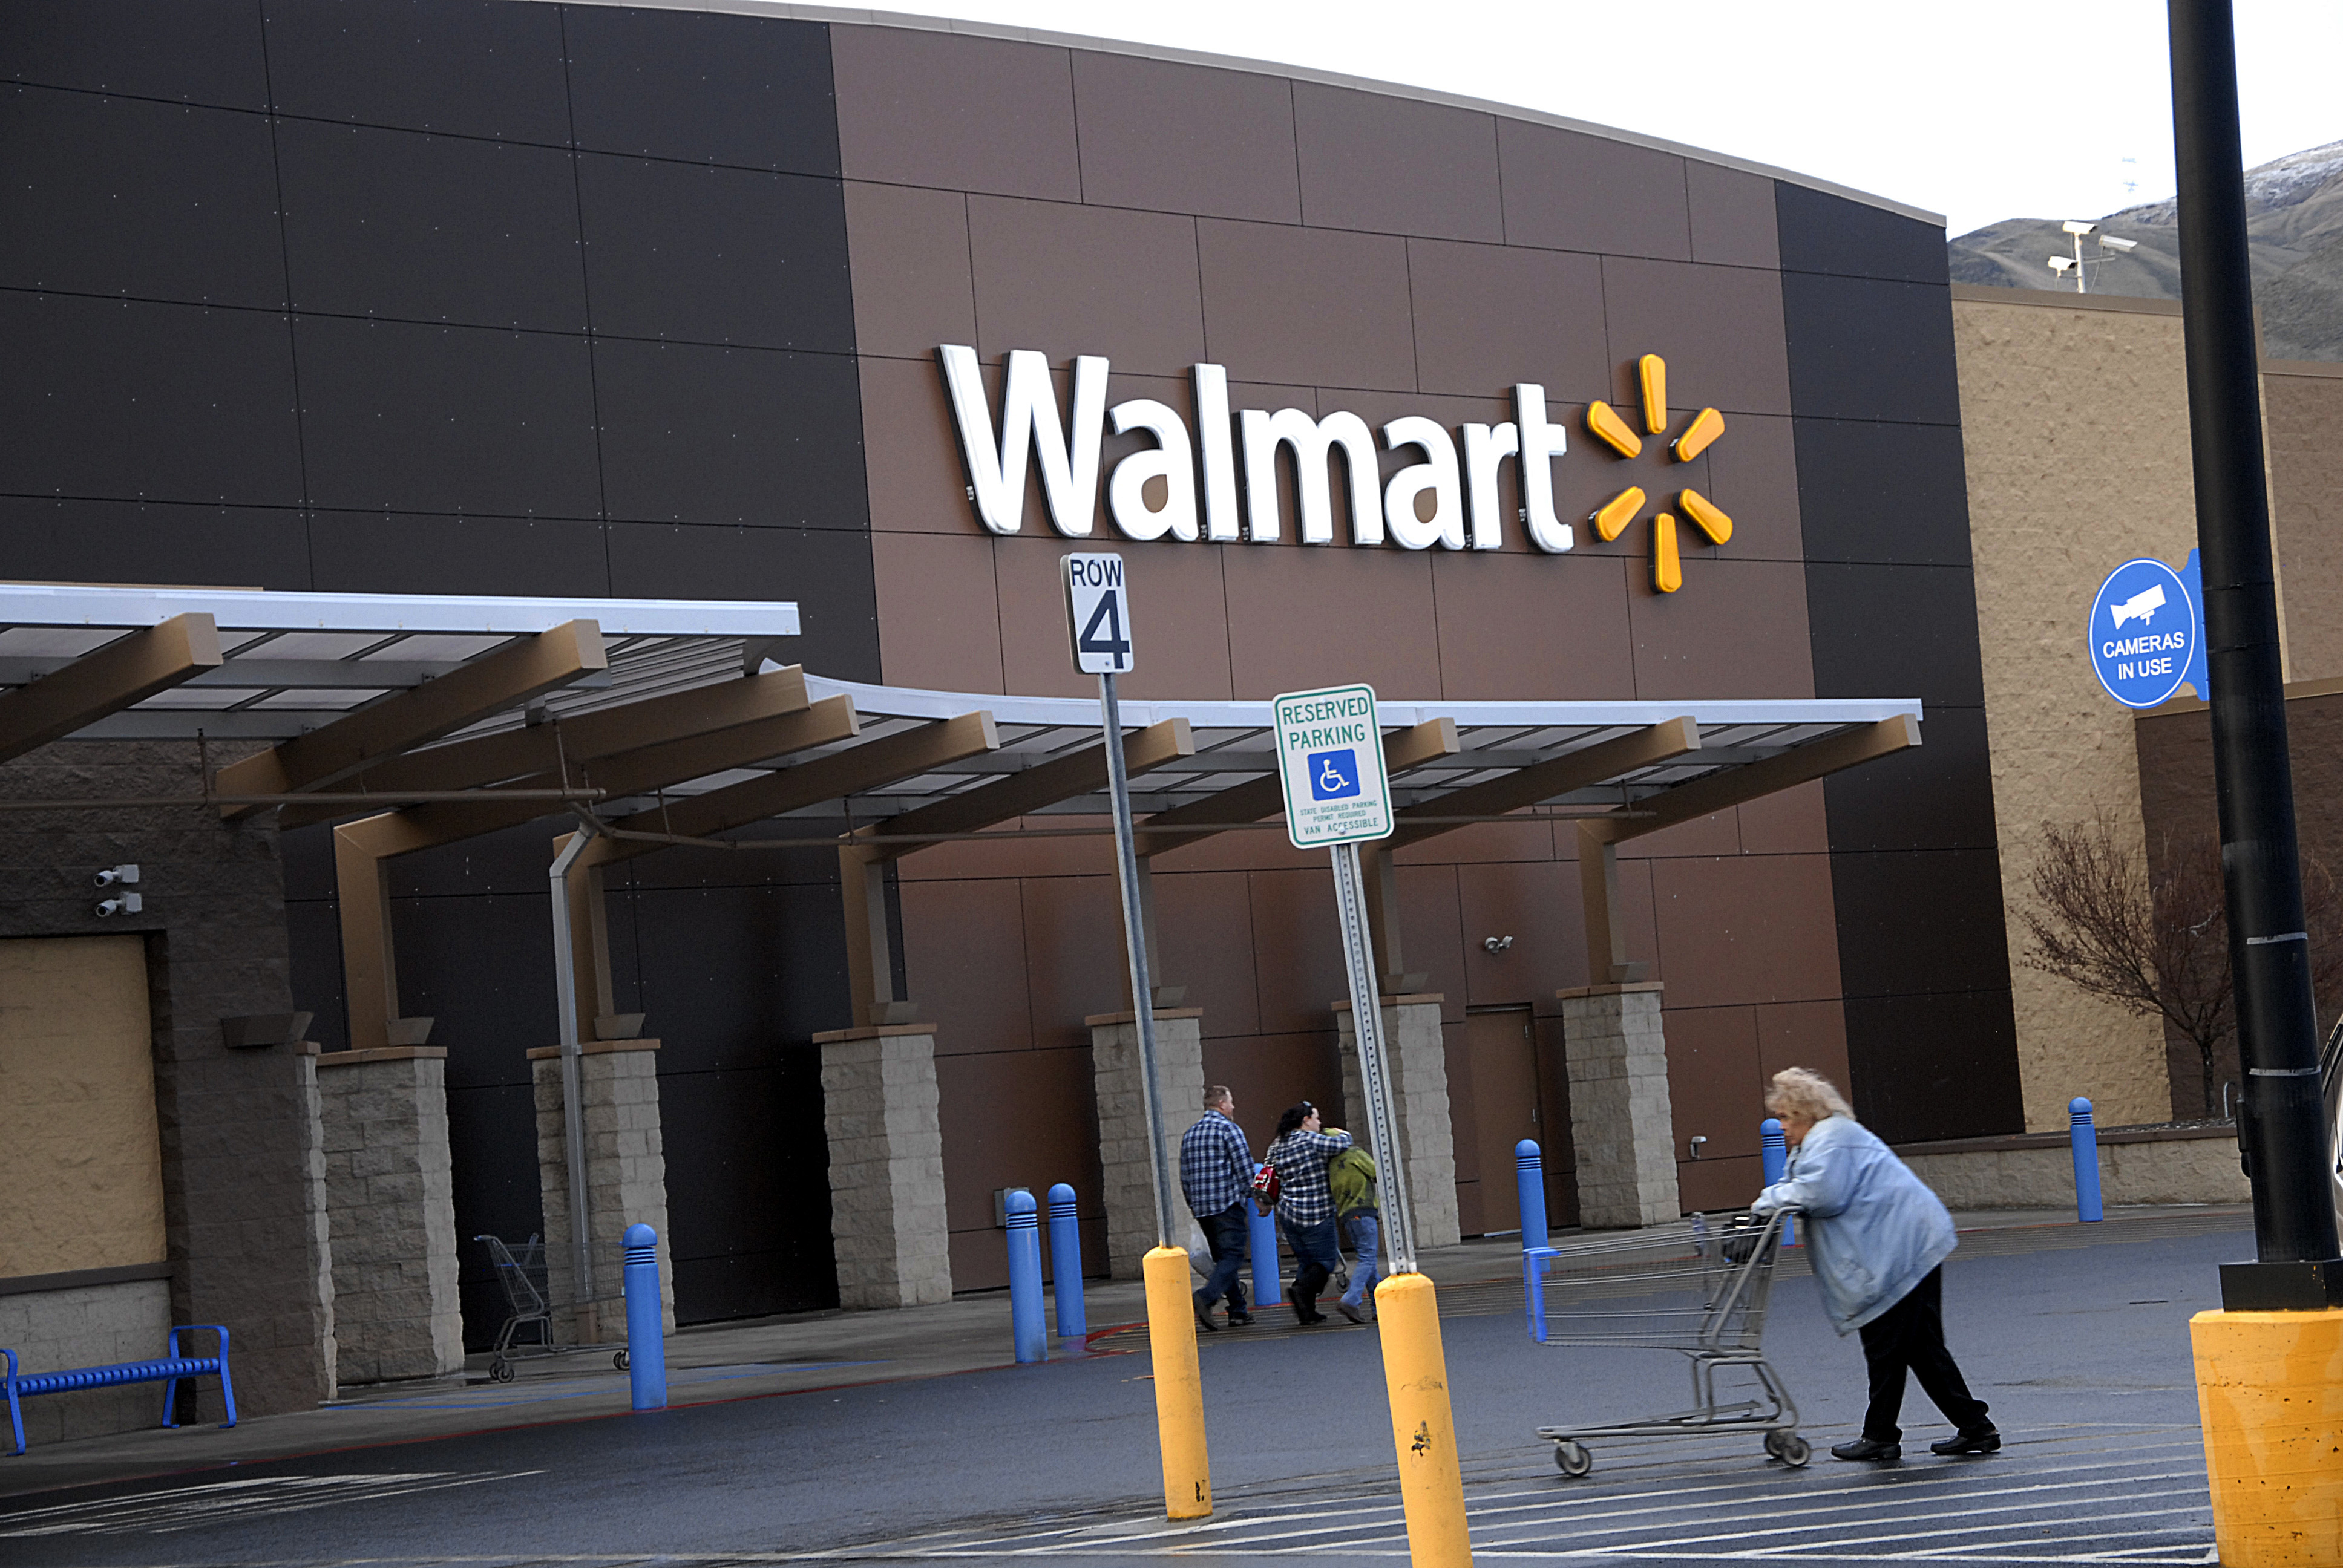 New Year's Eve store hours 2016: What time is Walmart open?